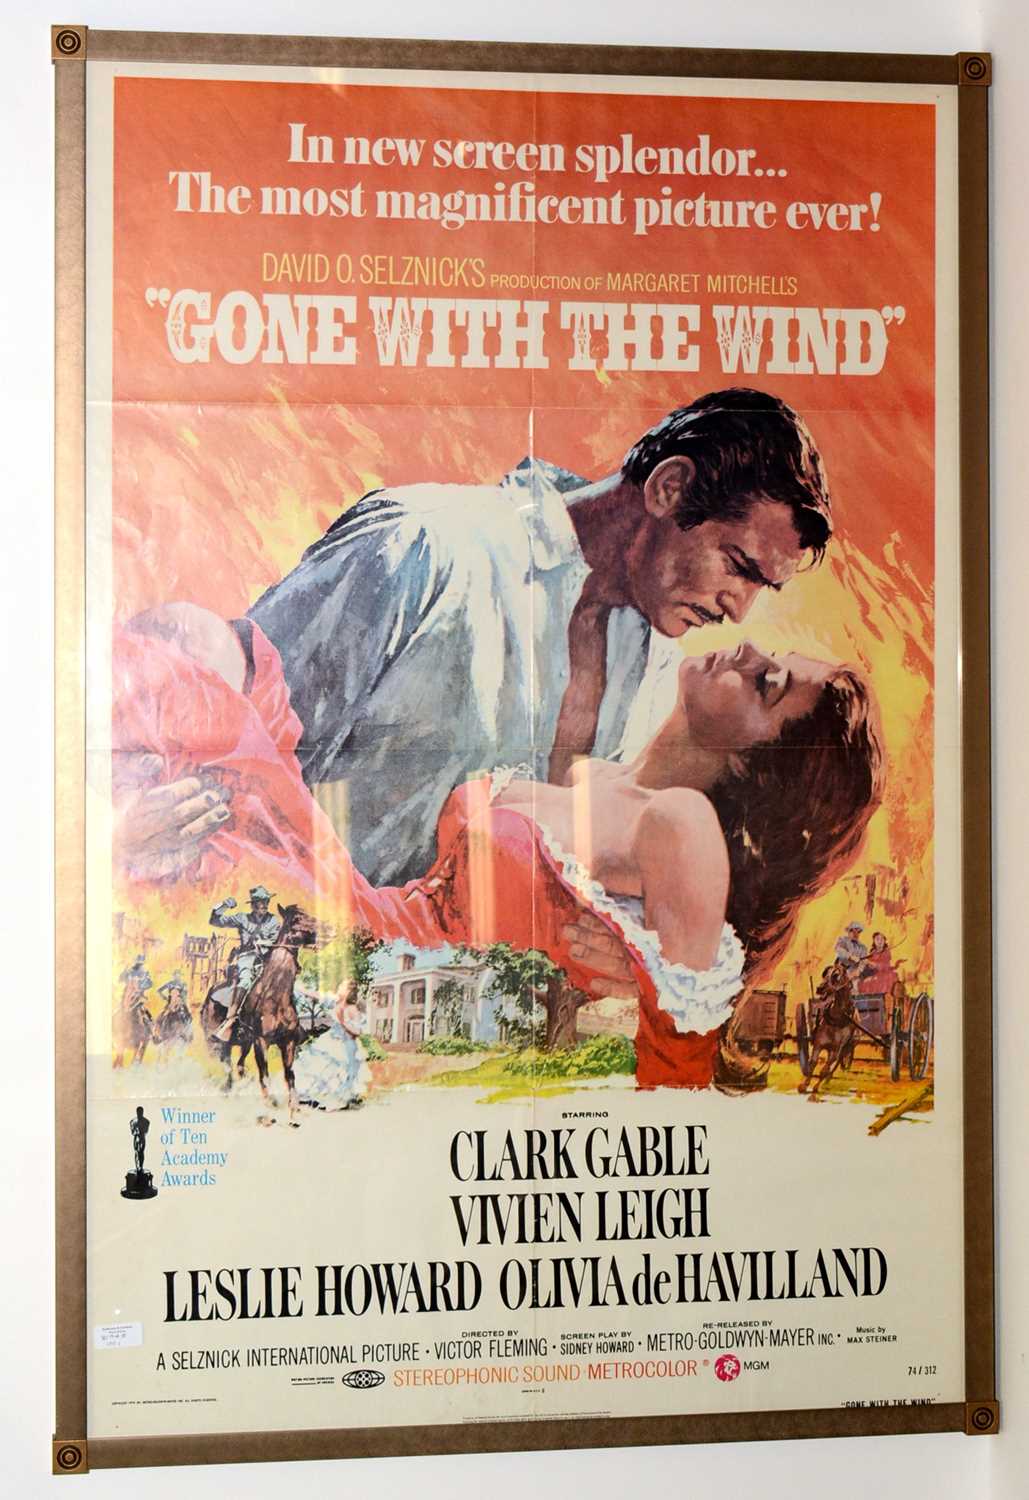 Lot 1287 - Movie poster for "Gone with the Wind"